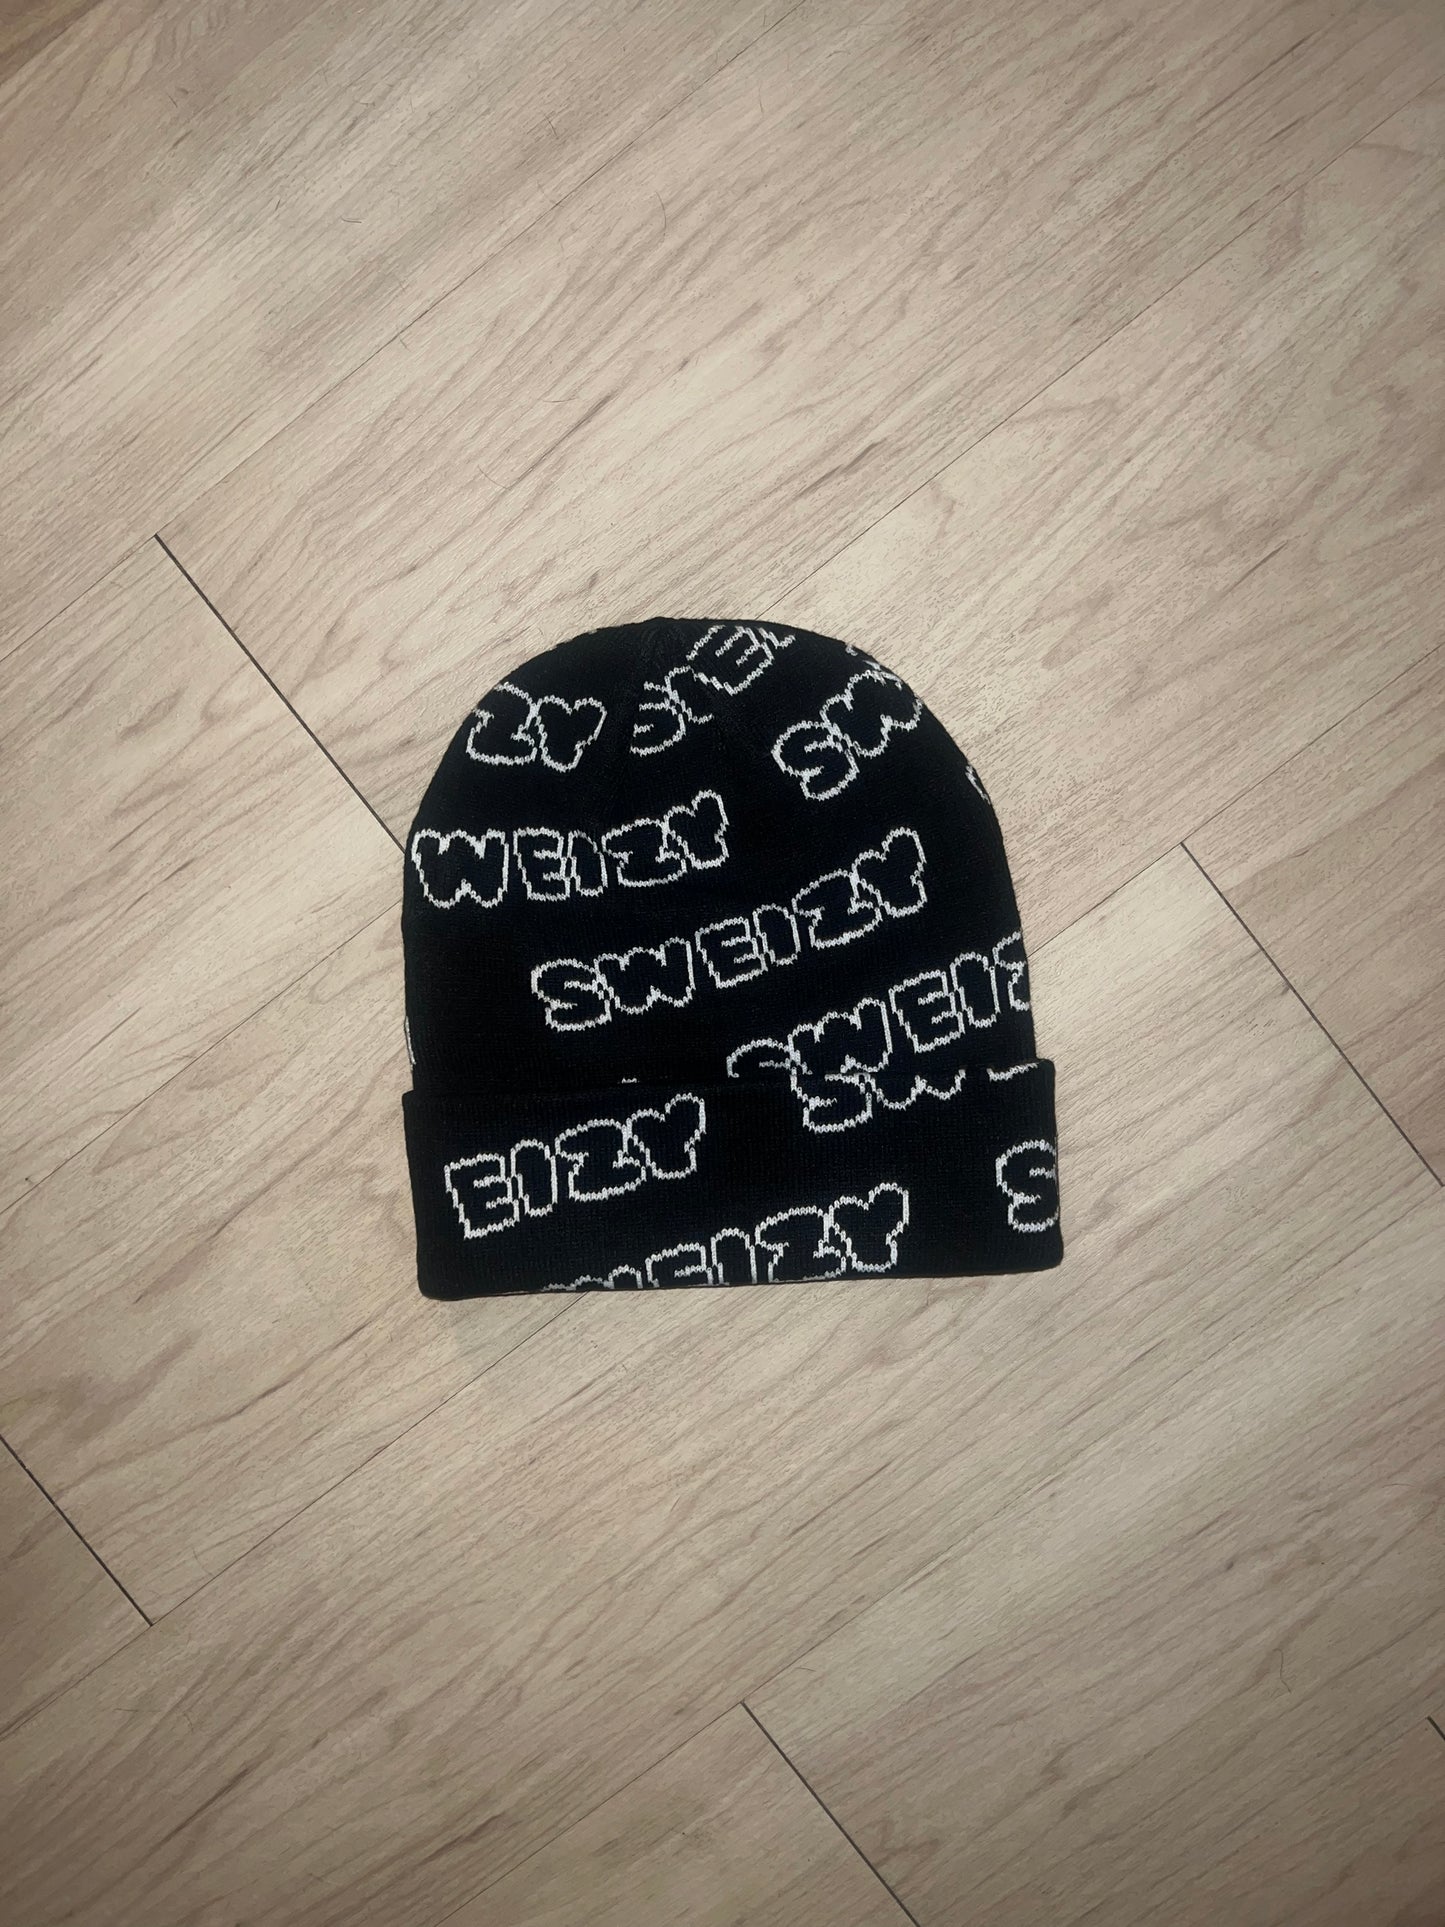 All-Over Sweizy Beanie